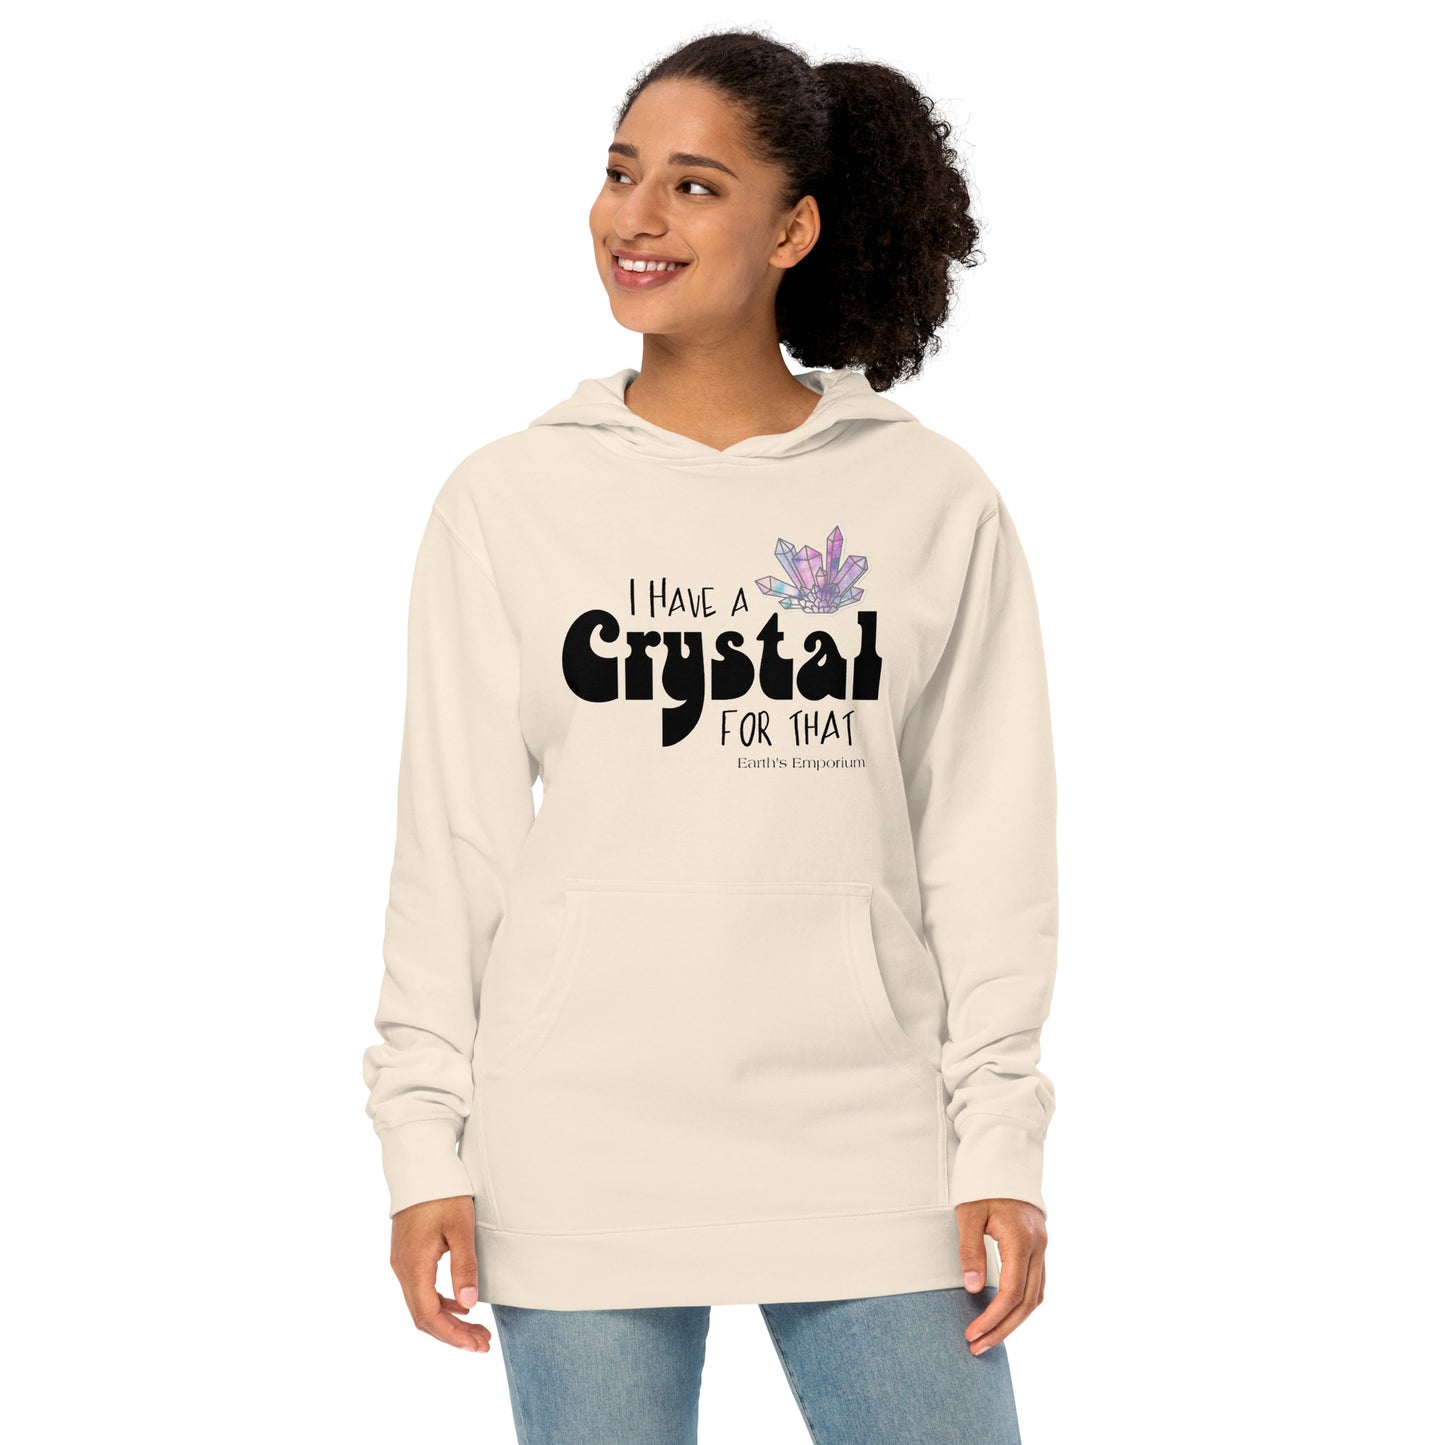 "I have a crystal for that" Unisex midweight hoodie